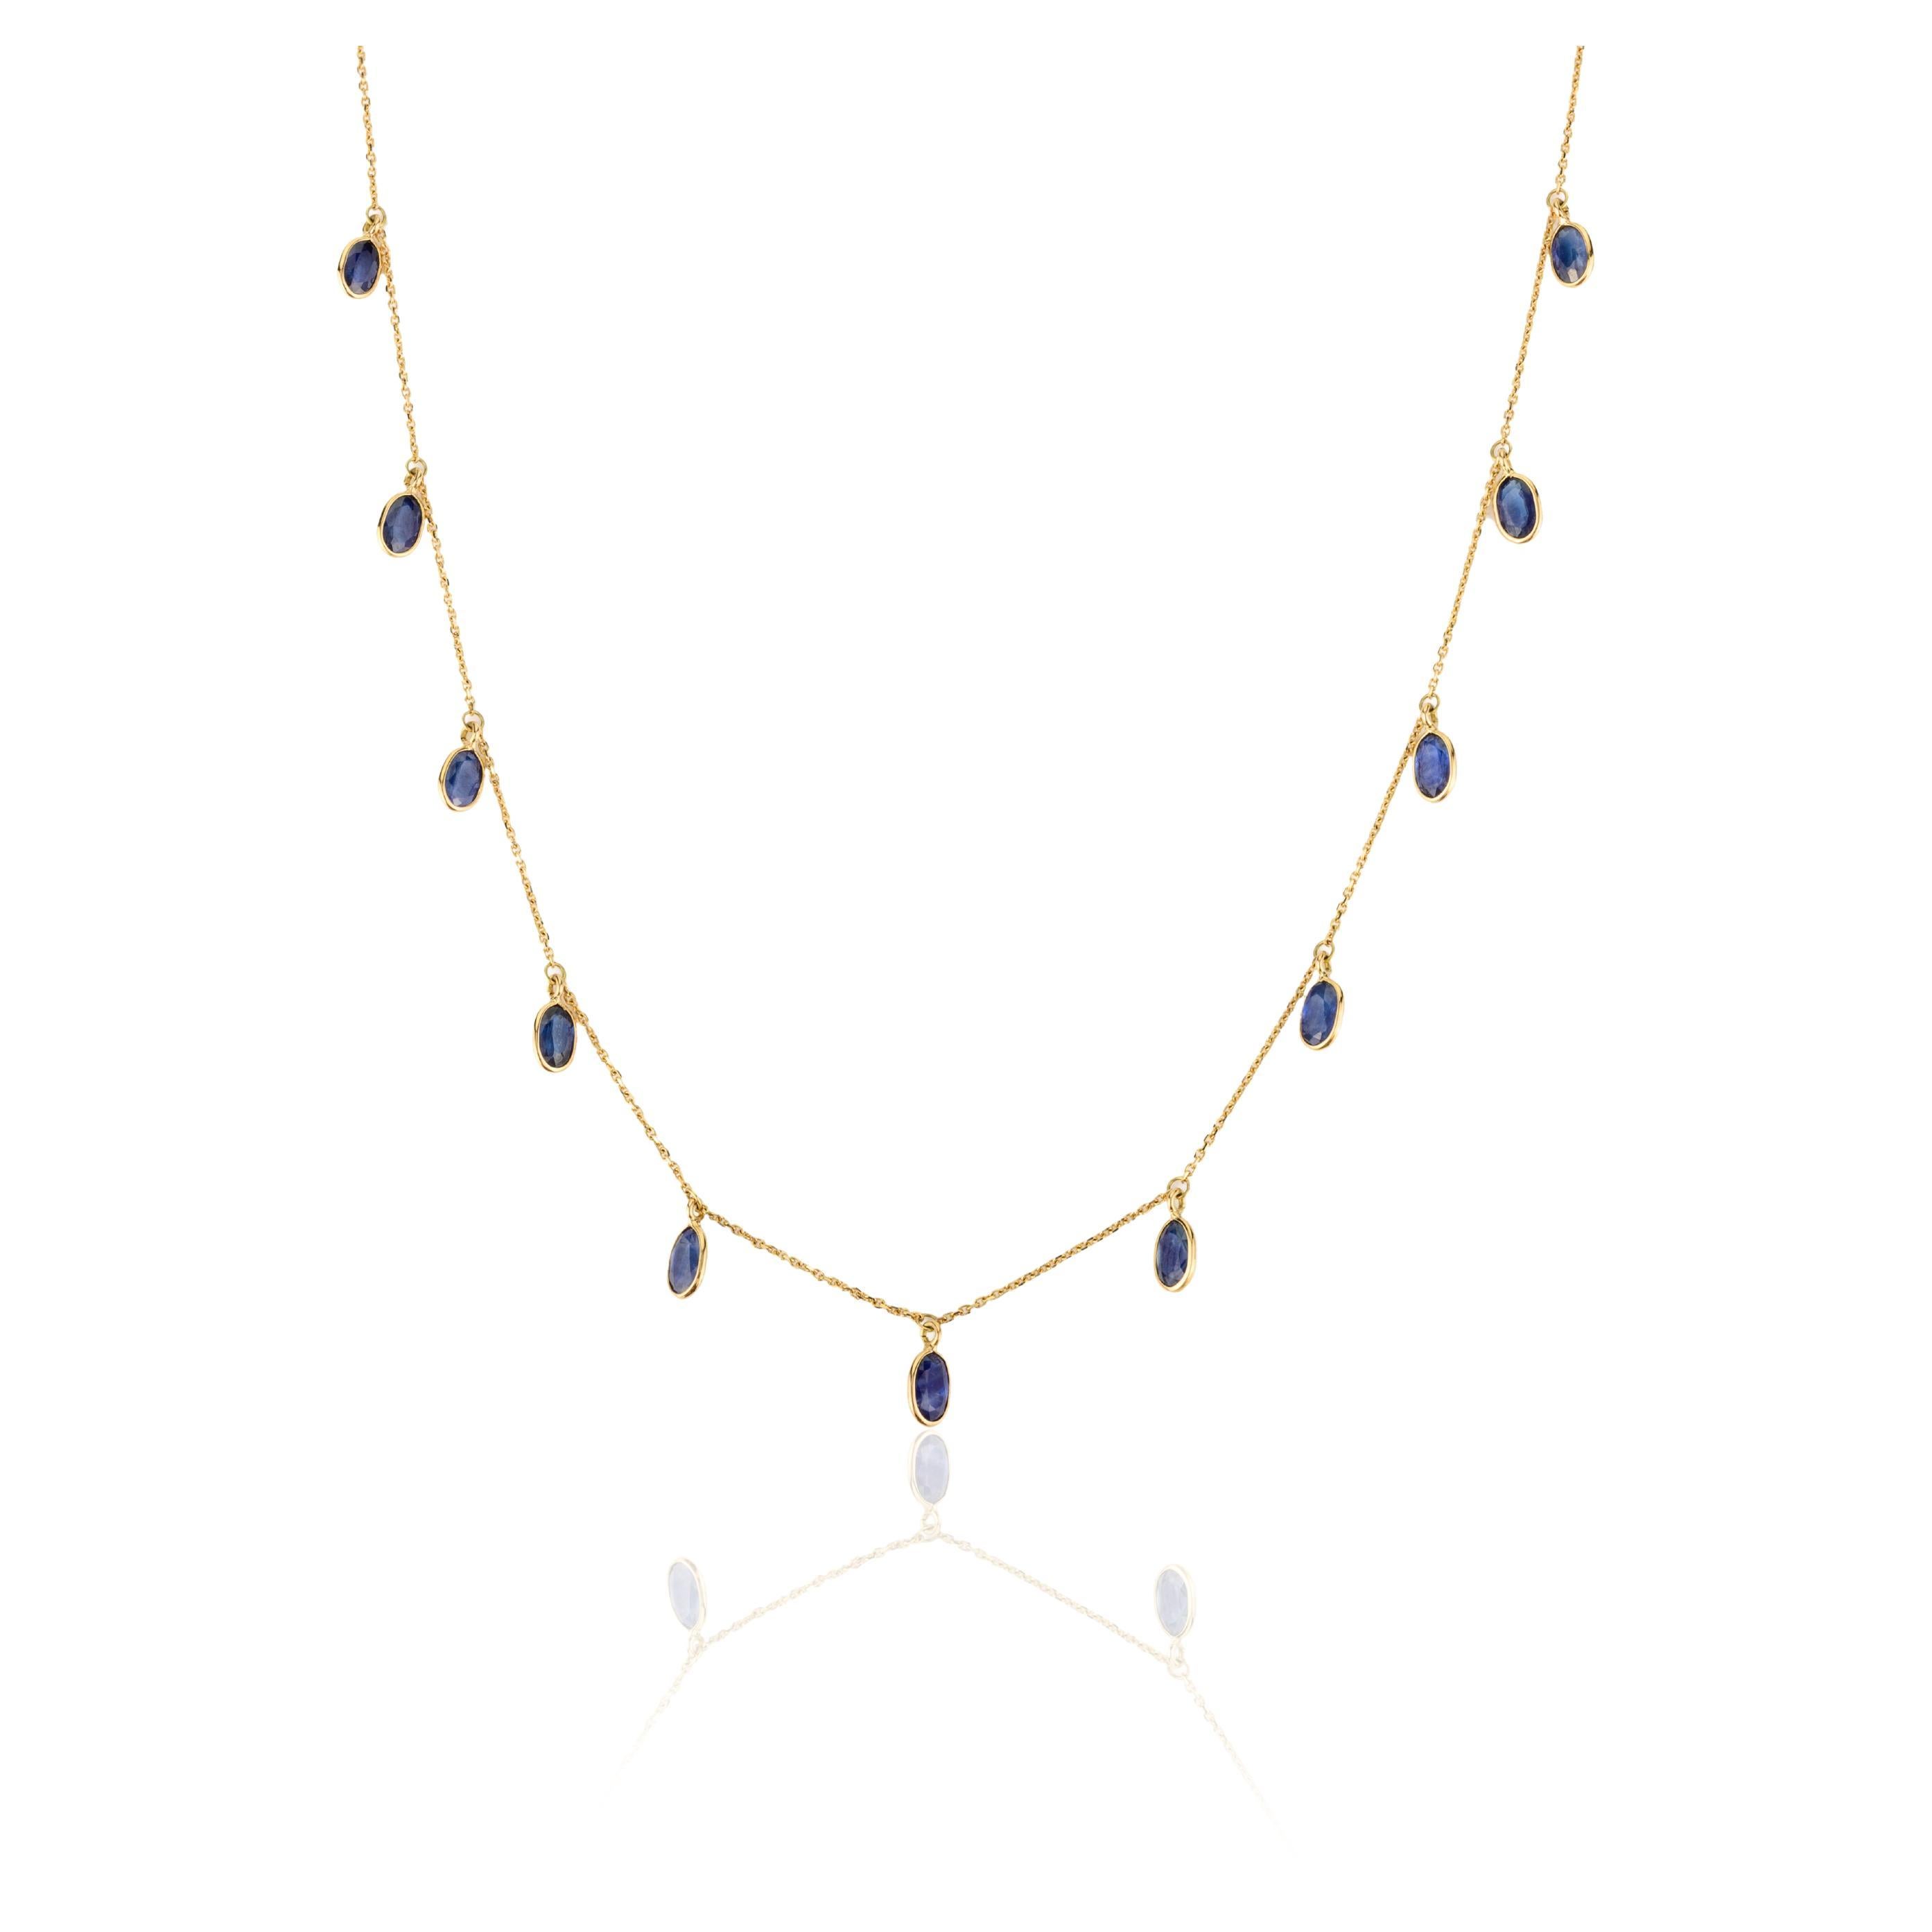 Minimalist Blue Sapphire Charm Necklace Crafted in 18k Yellow Gold for Her